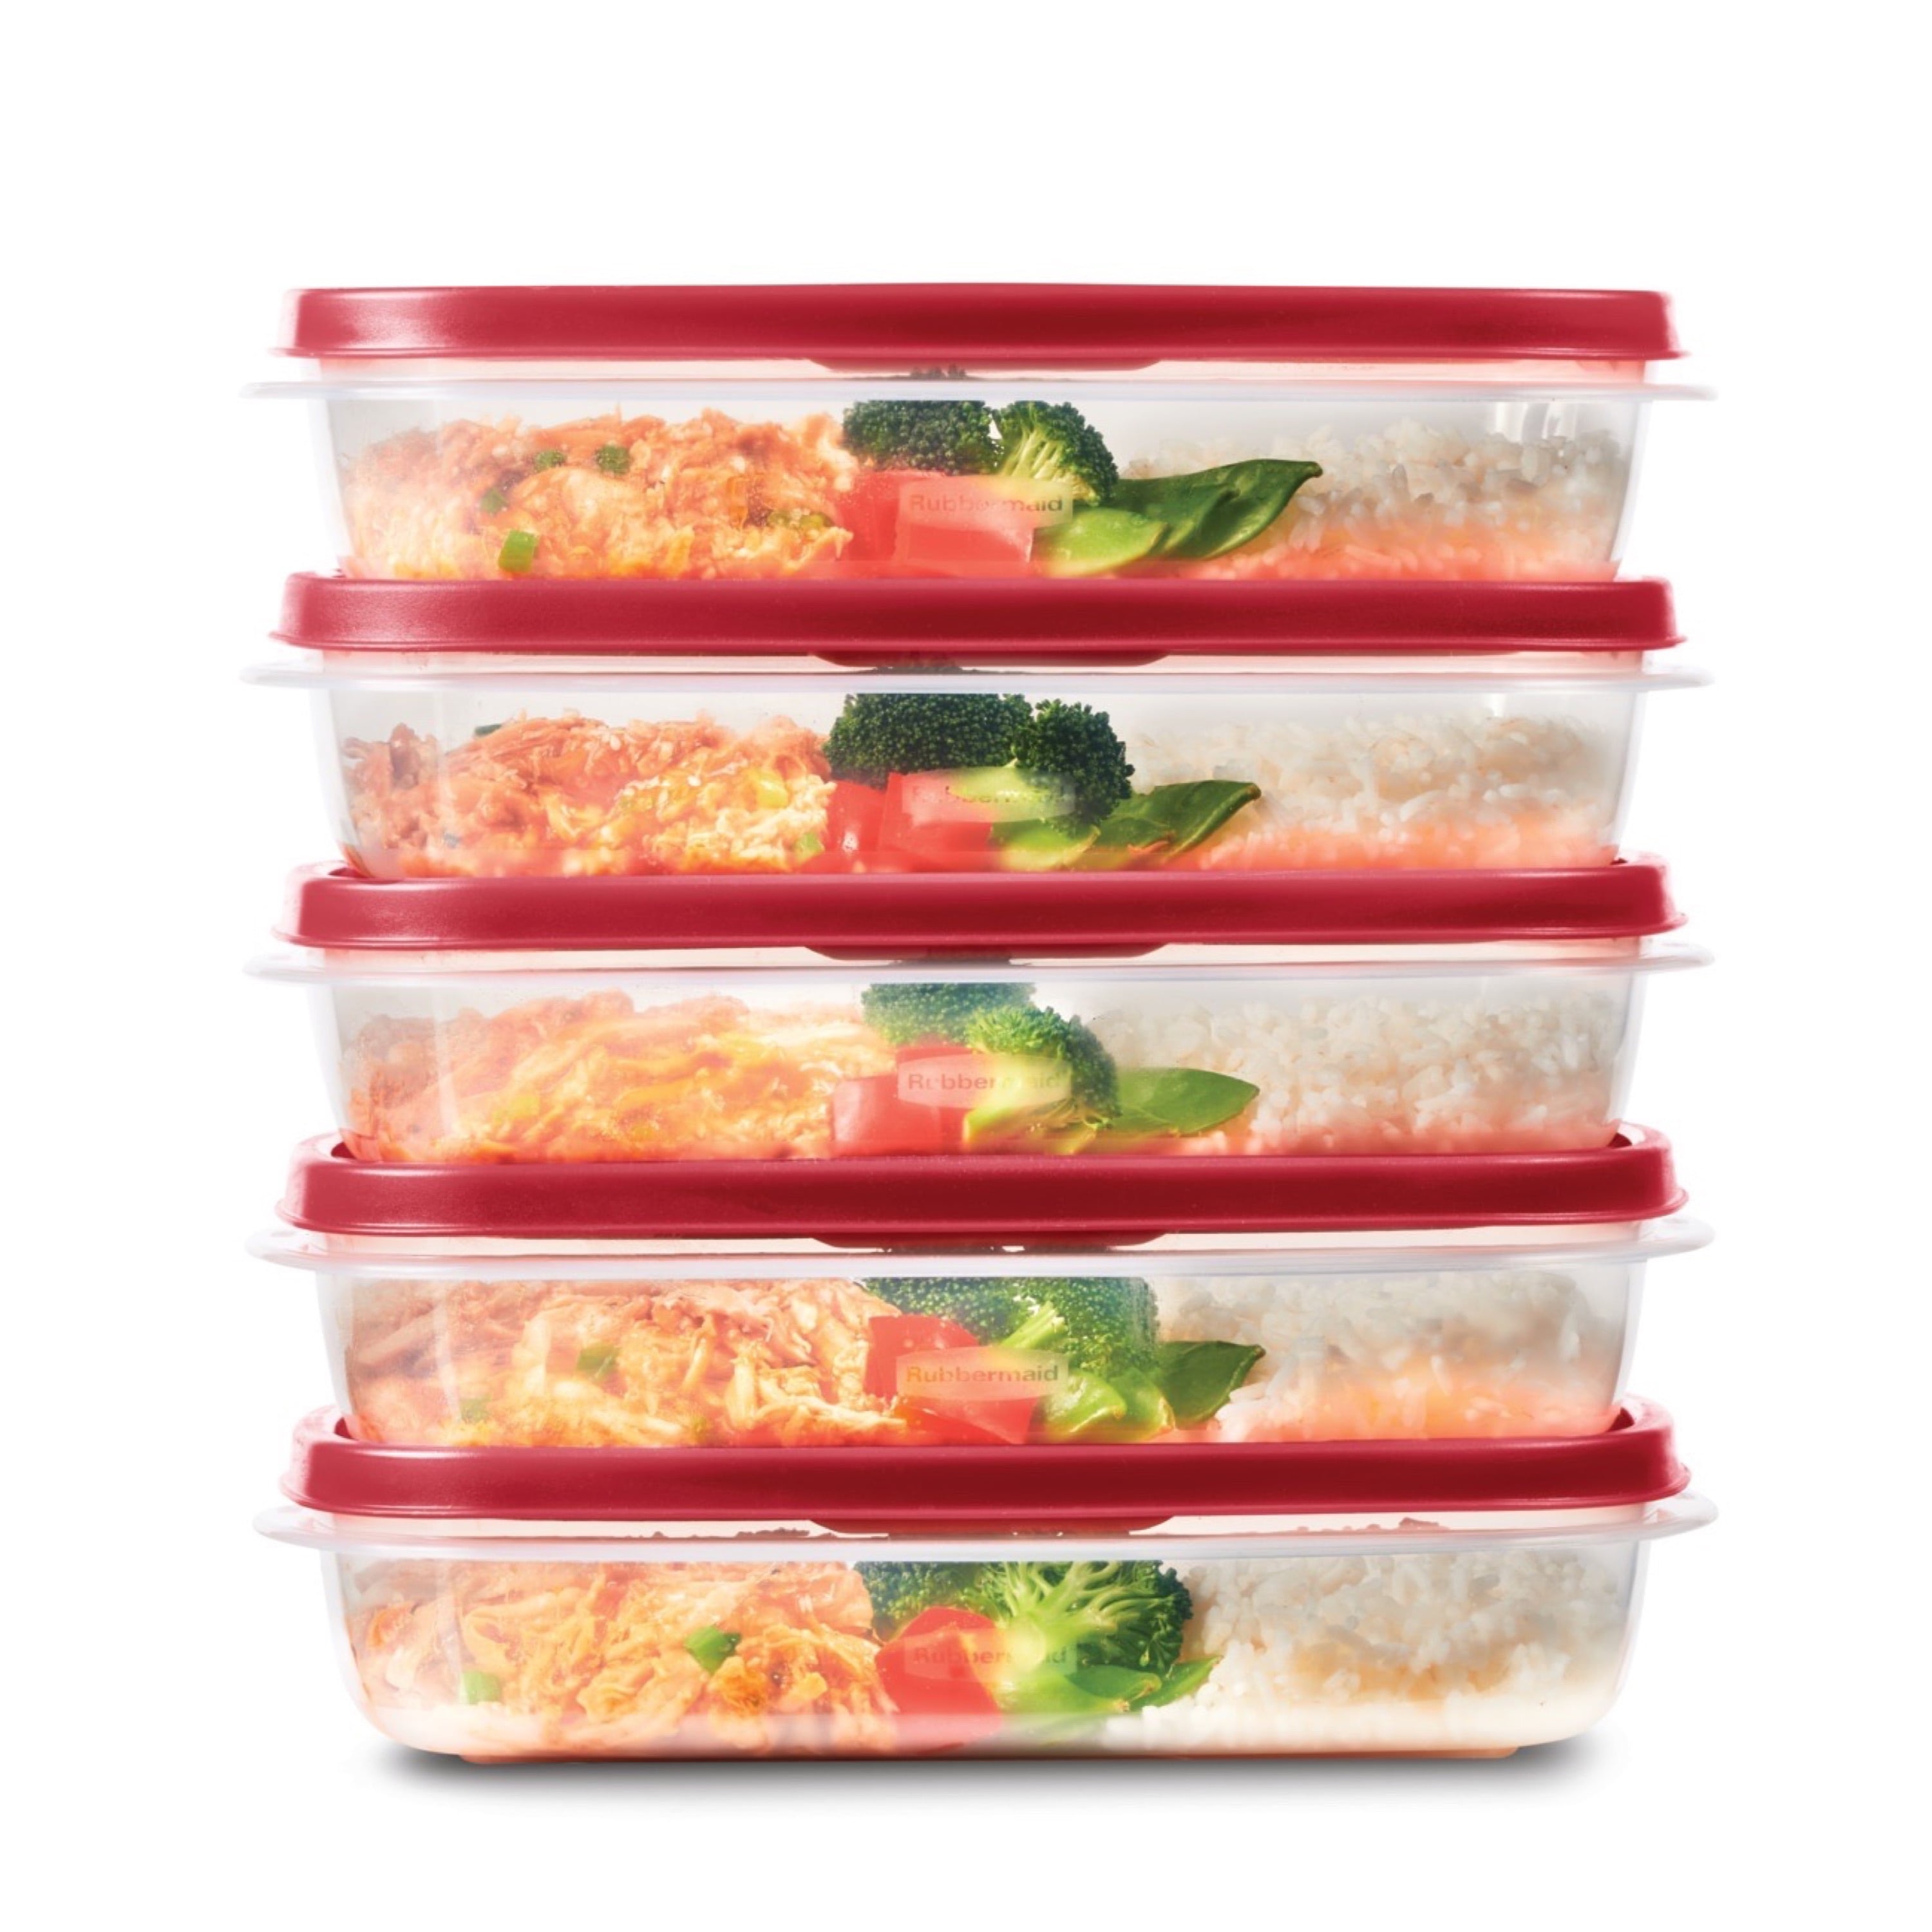 Rubbermaid Easy Find Lids Food Storage Container, 5 Cup, Racer Red 1777087  